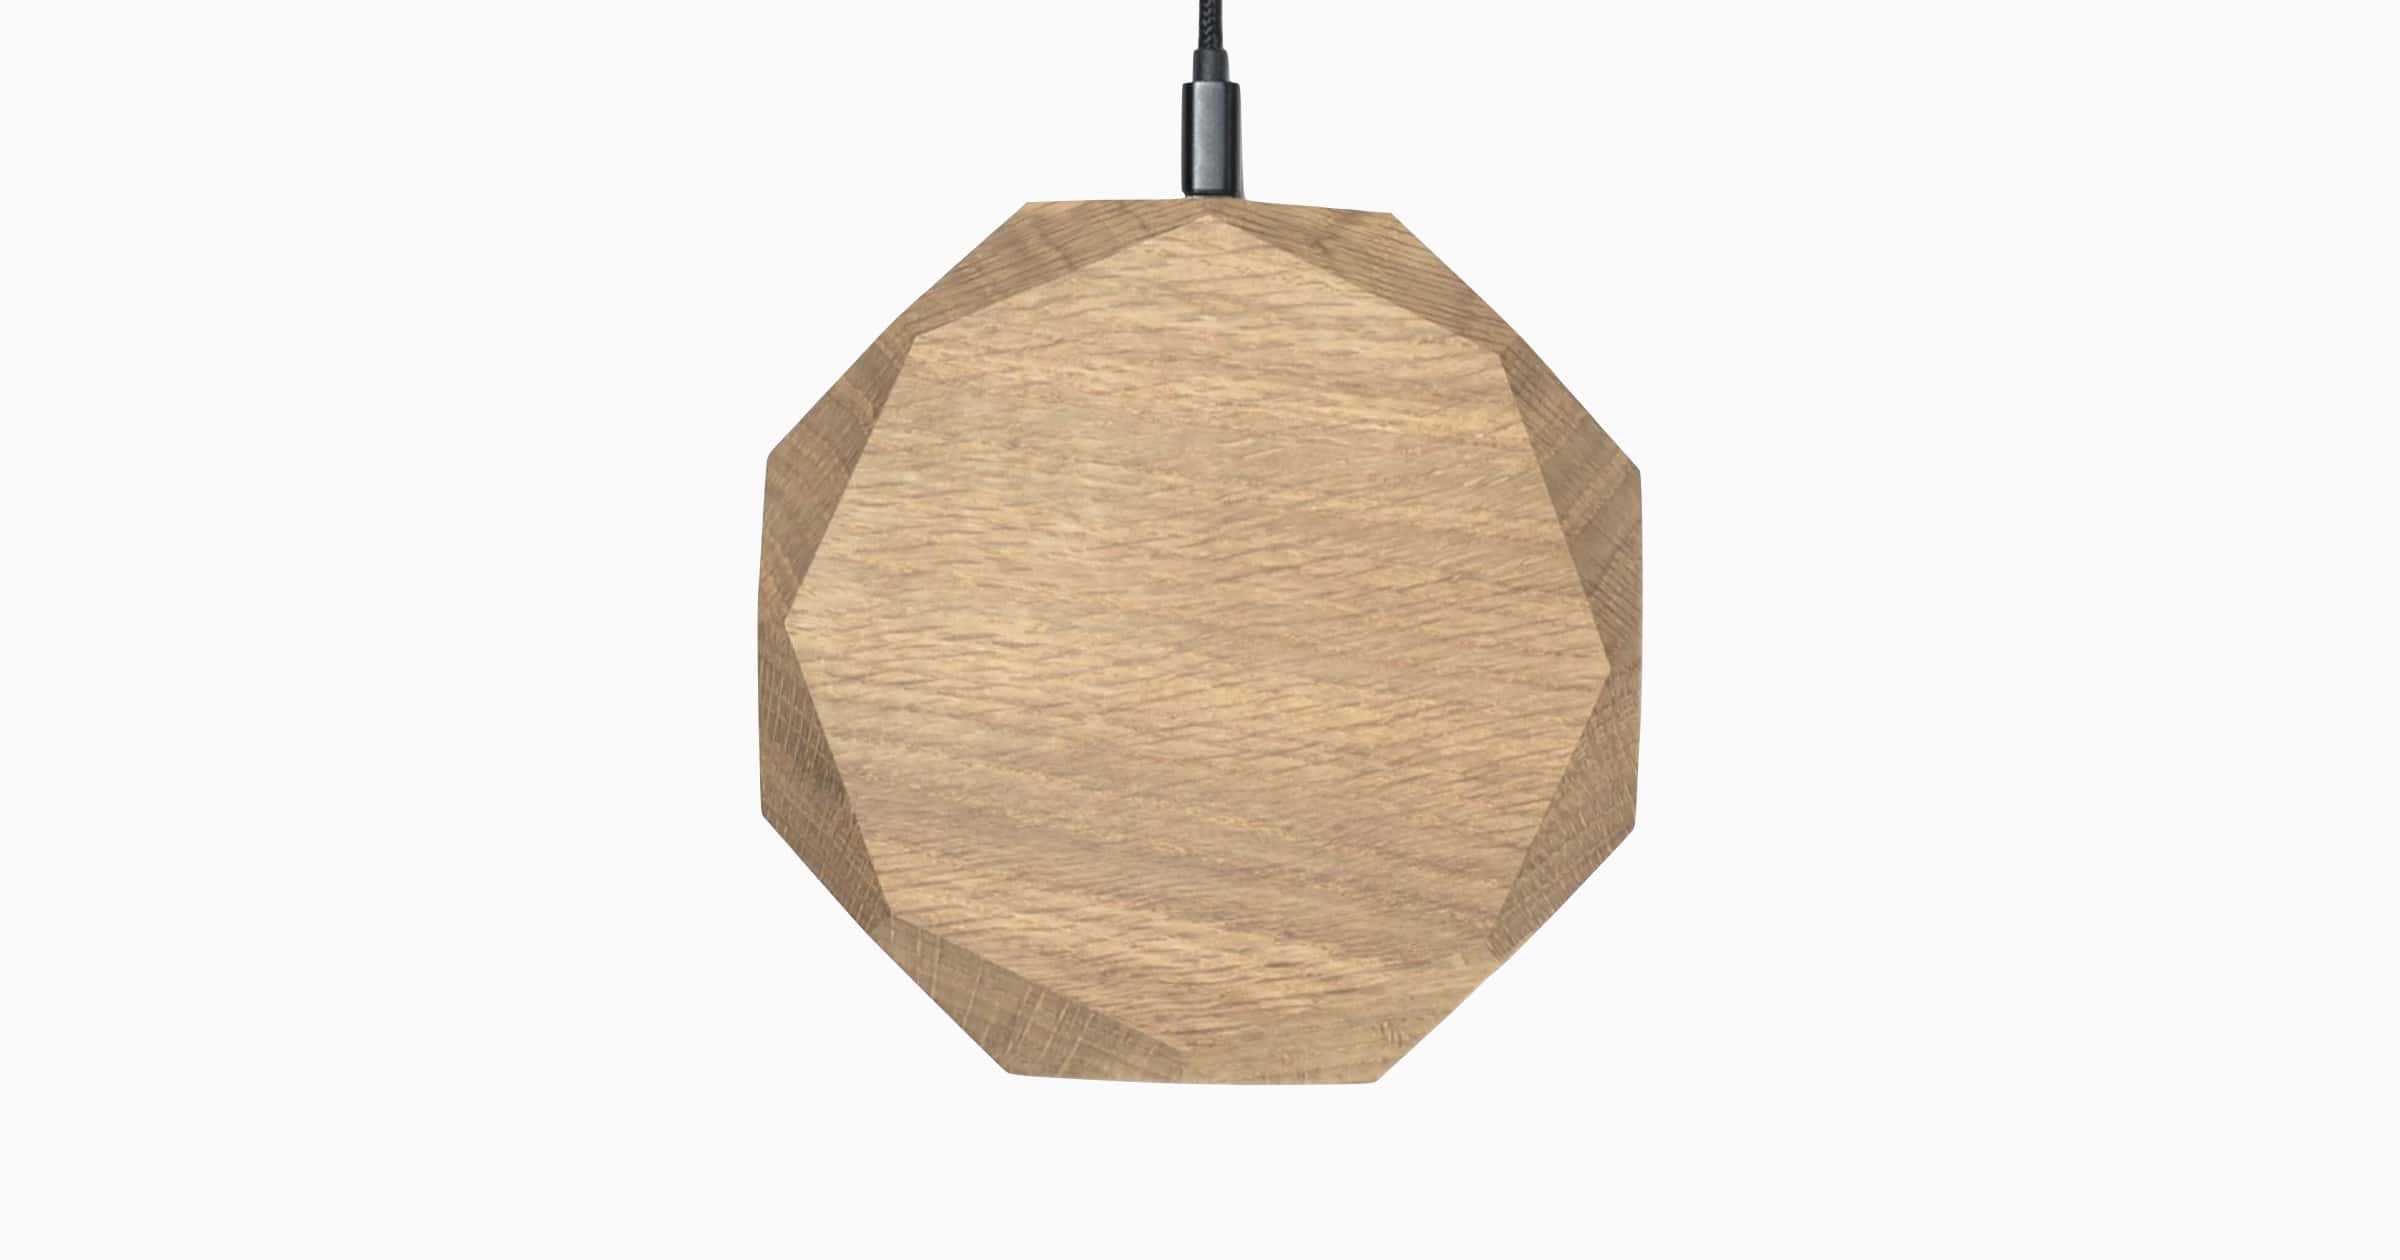 Oakywood Shop’s Qi wireless charger